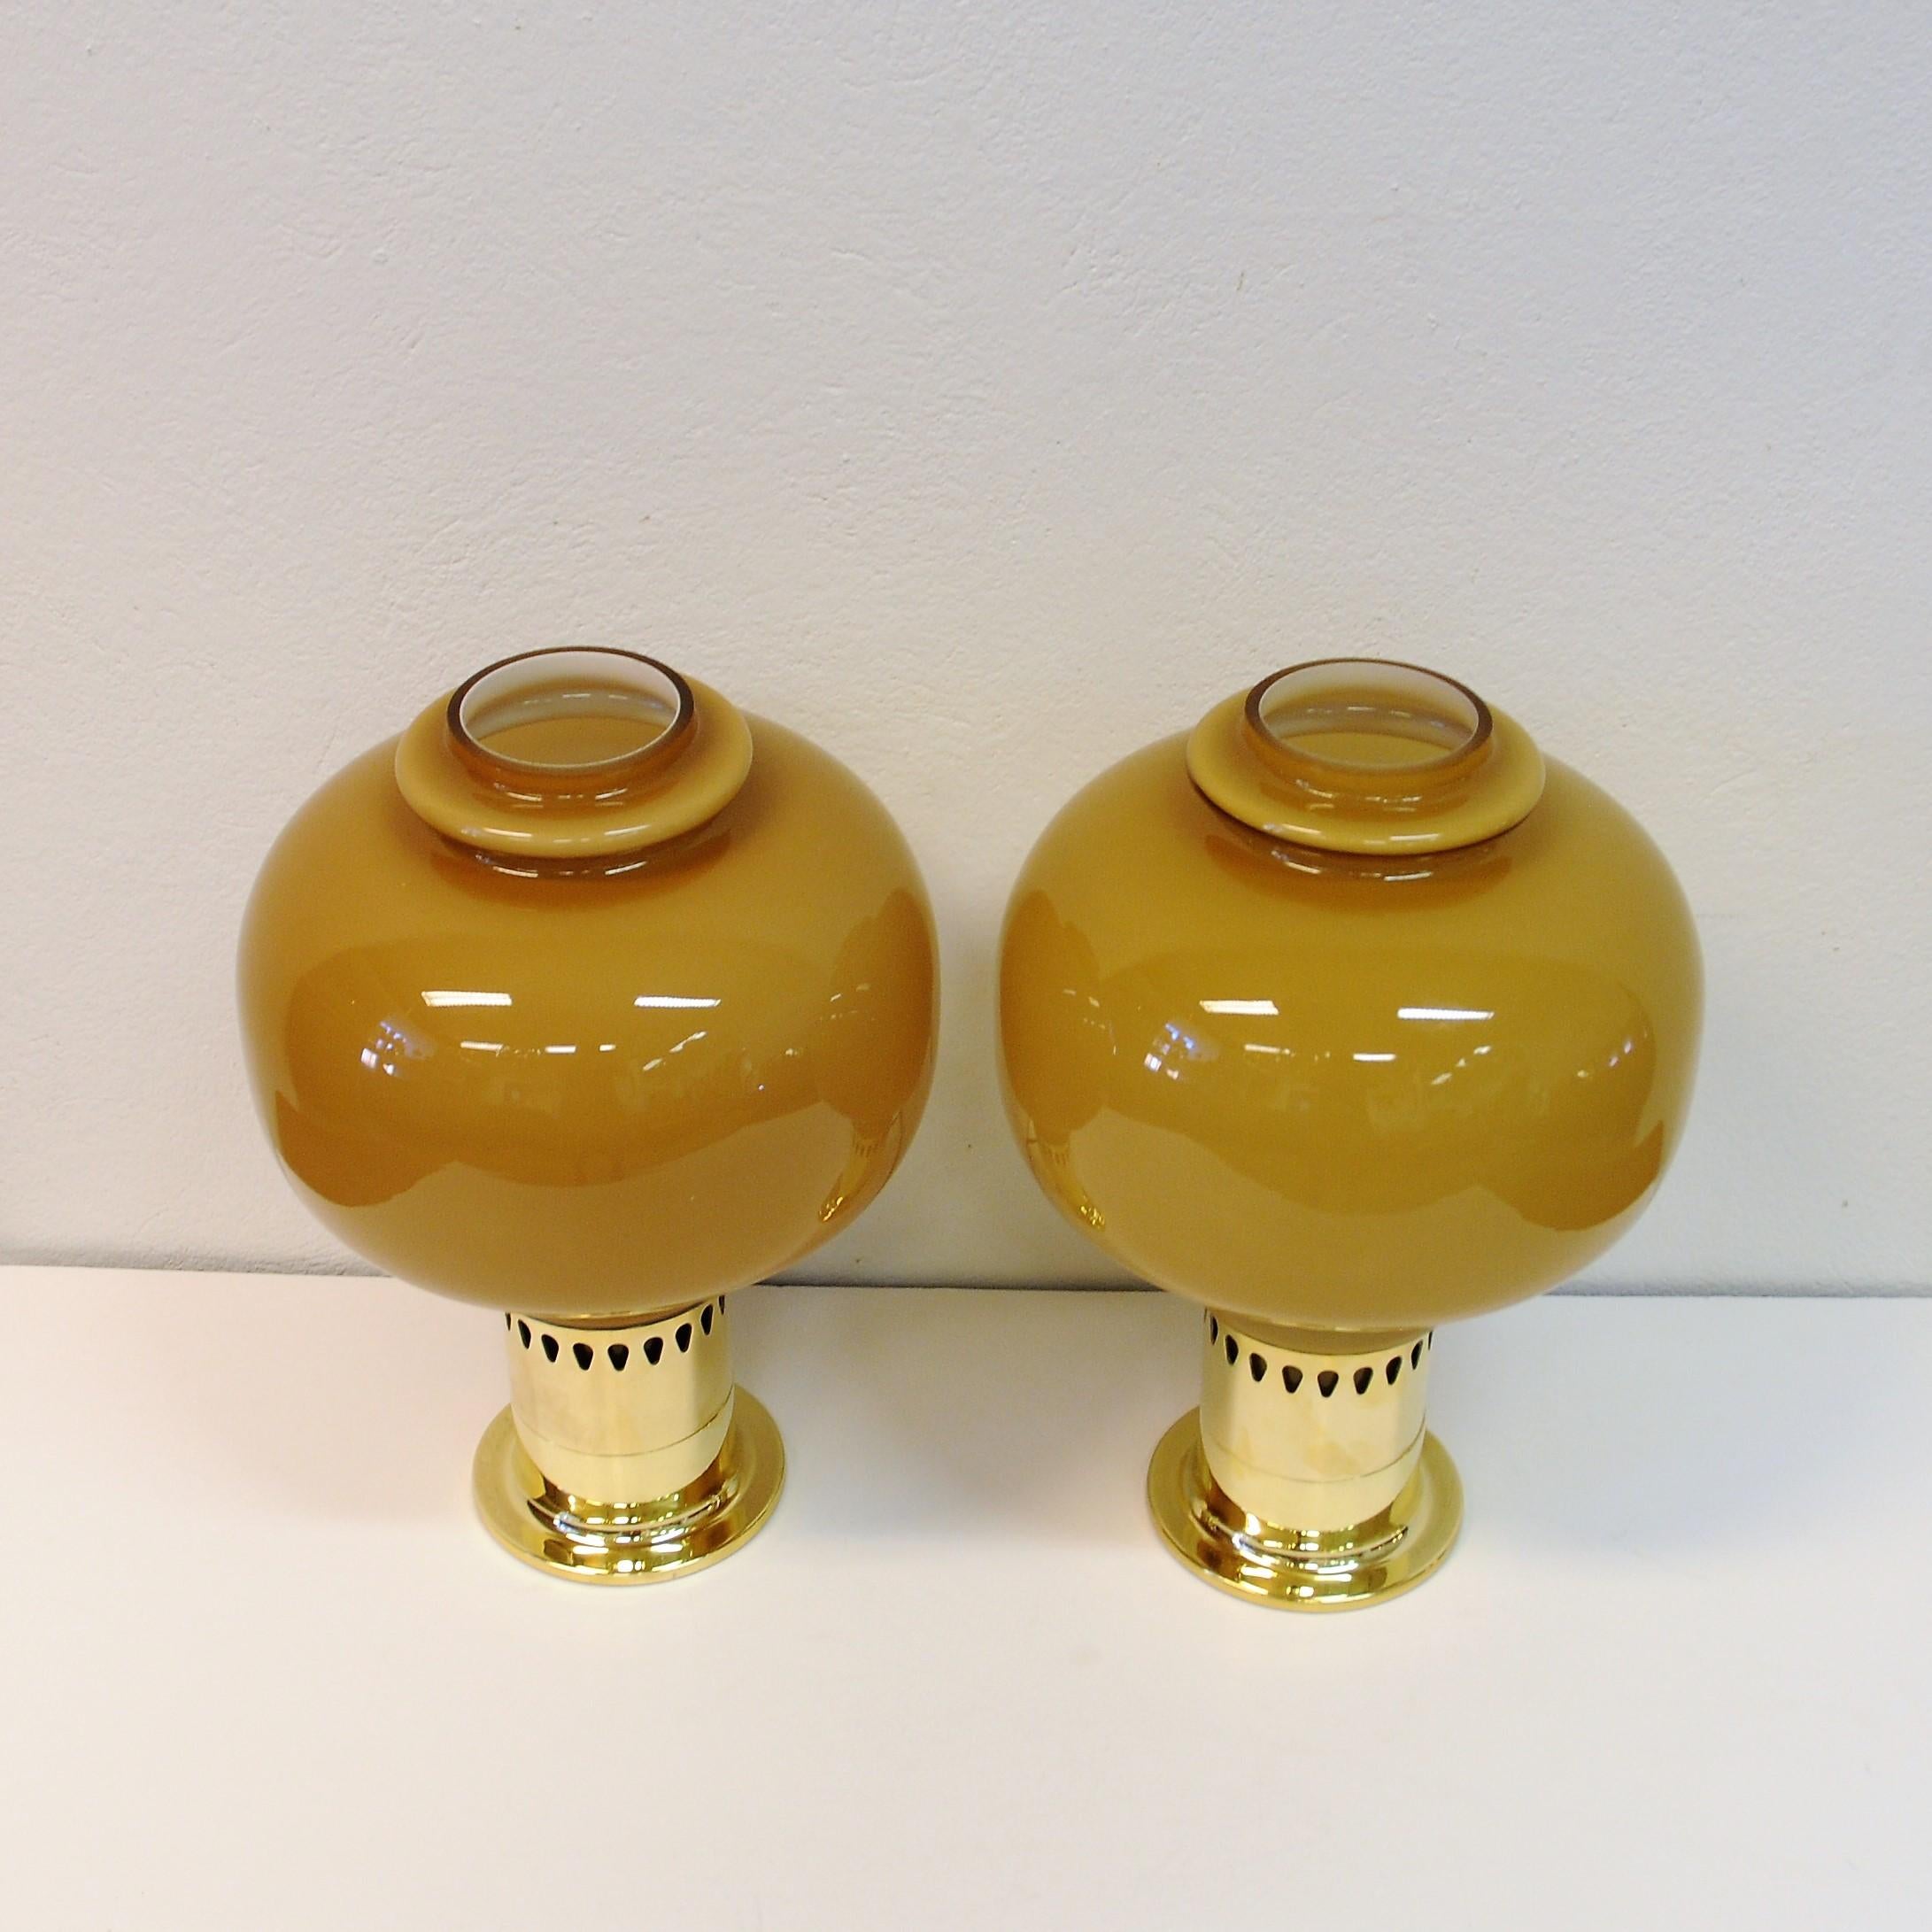 Scandinavian Modern Pair of Glass and Brass Table Lamps 1960s with Brown Glass Shades by Haj, Sweden